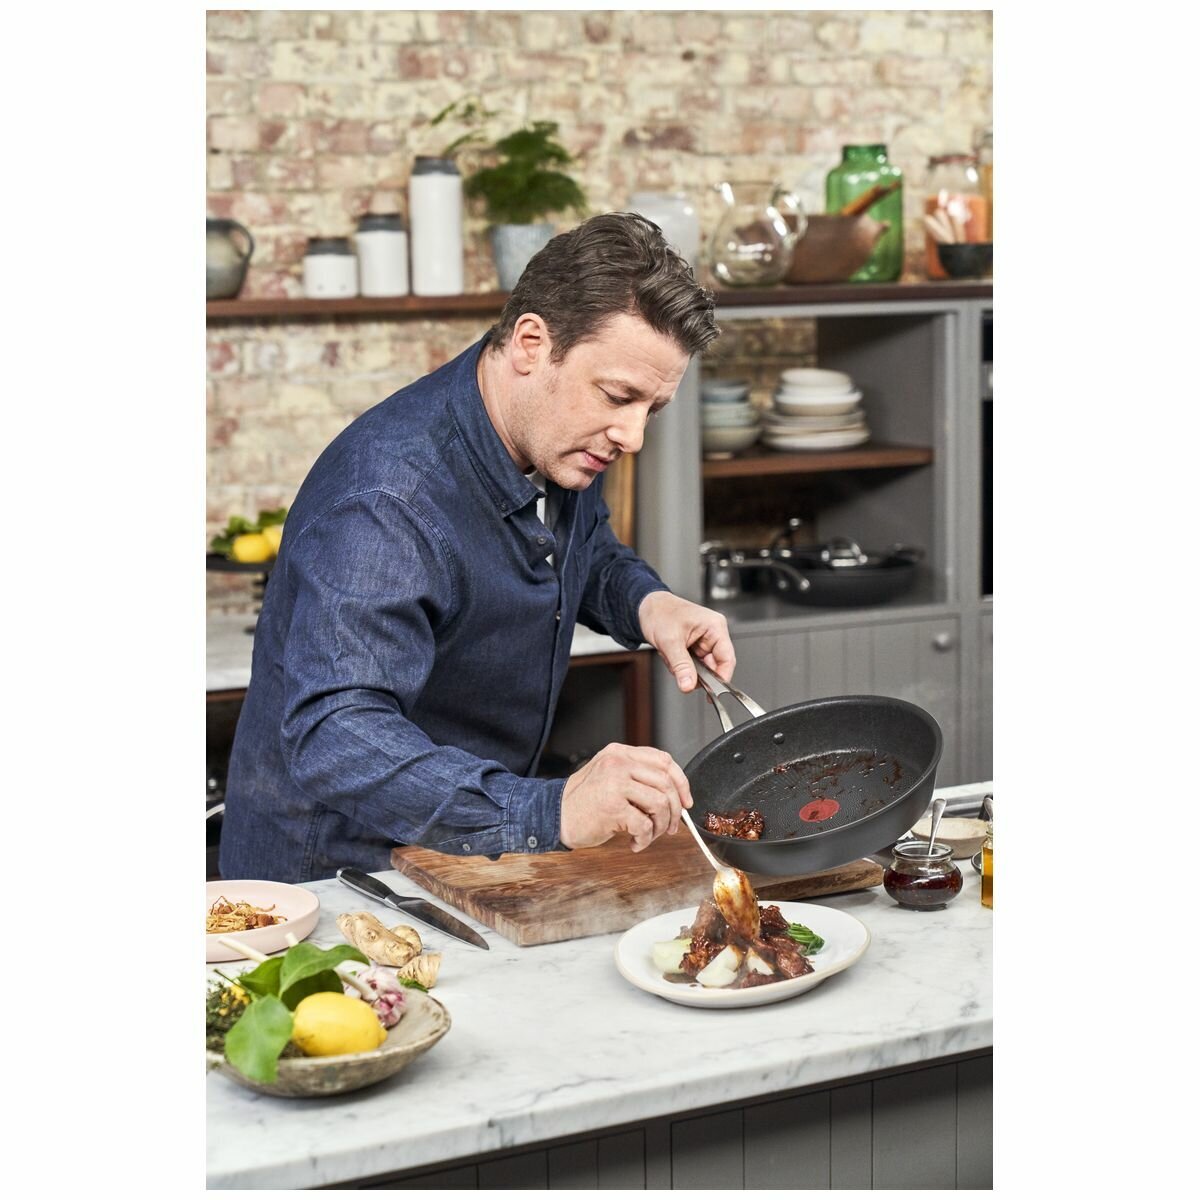 JAMIE OLIVER Cooks Classic Induction Hard Anodised All-In-One Pan